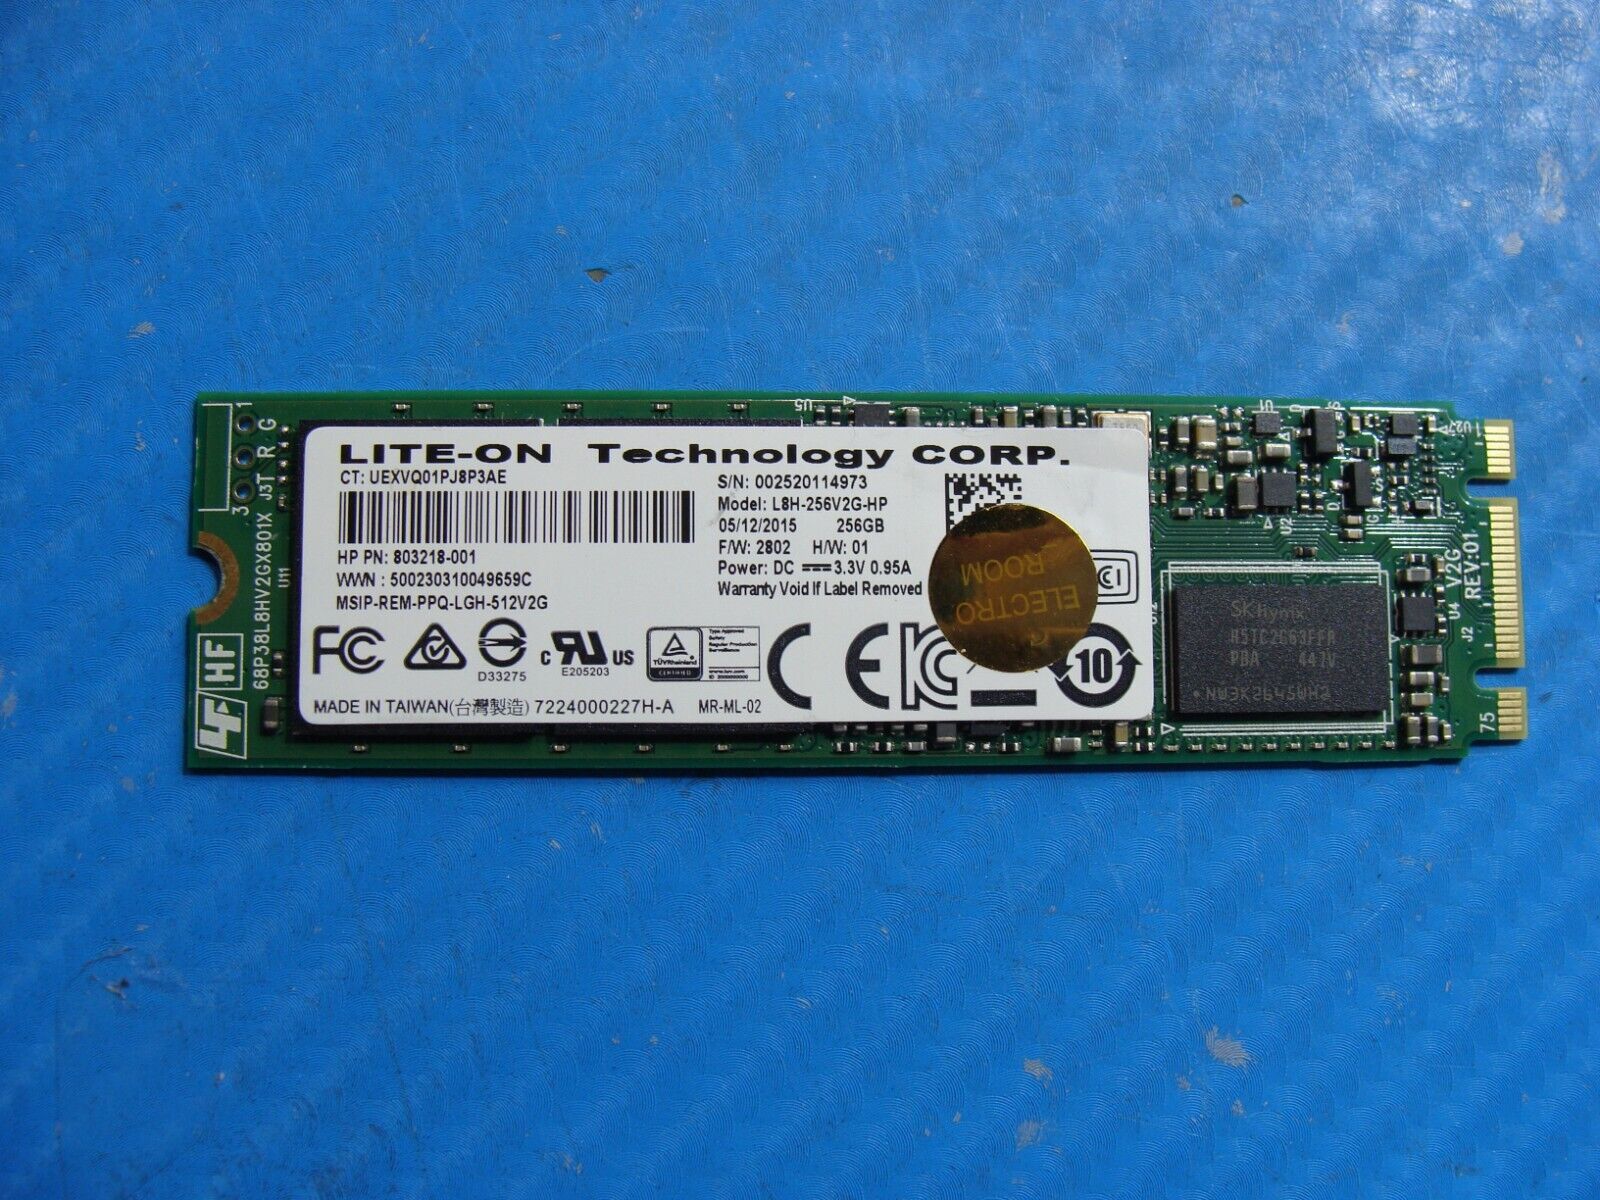 HP 13-4003dx Lite-On SATA M.2 256GB SSD Solid State Drive L8H-256V2G-HP